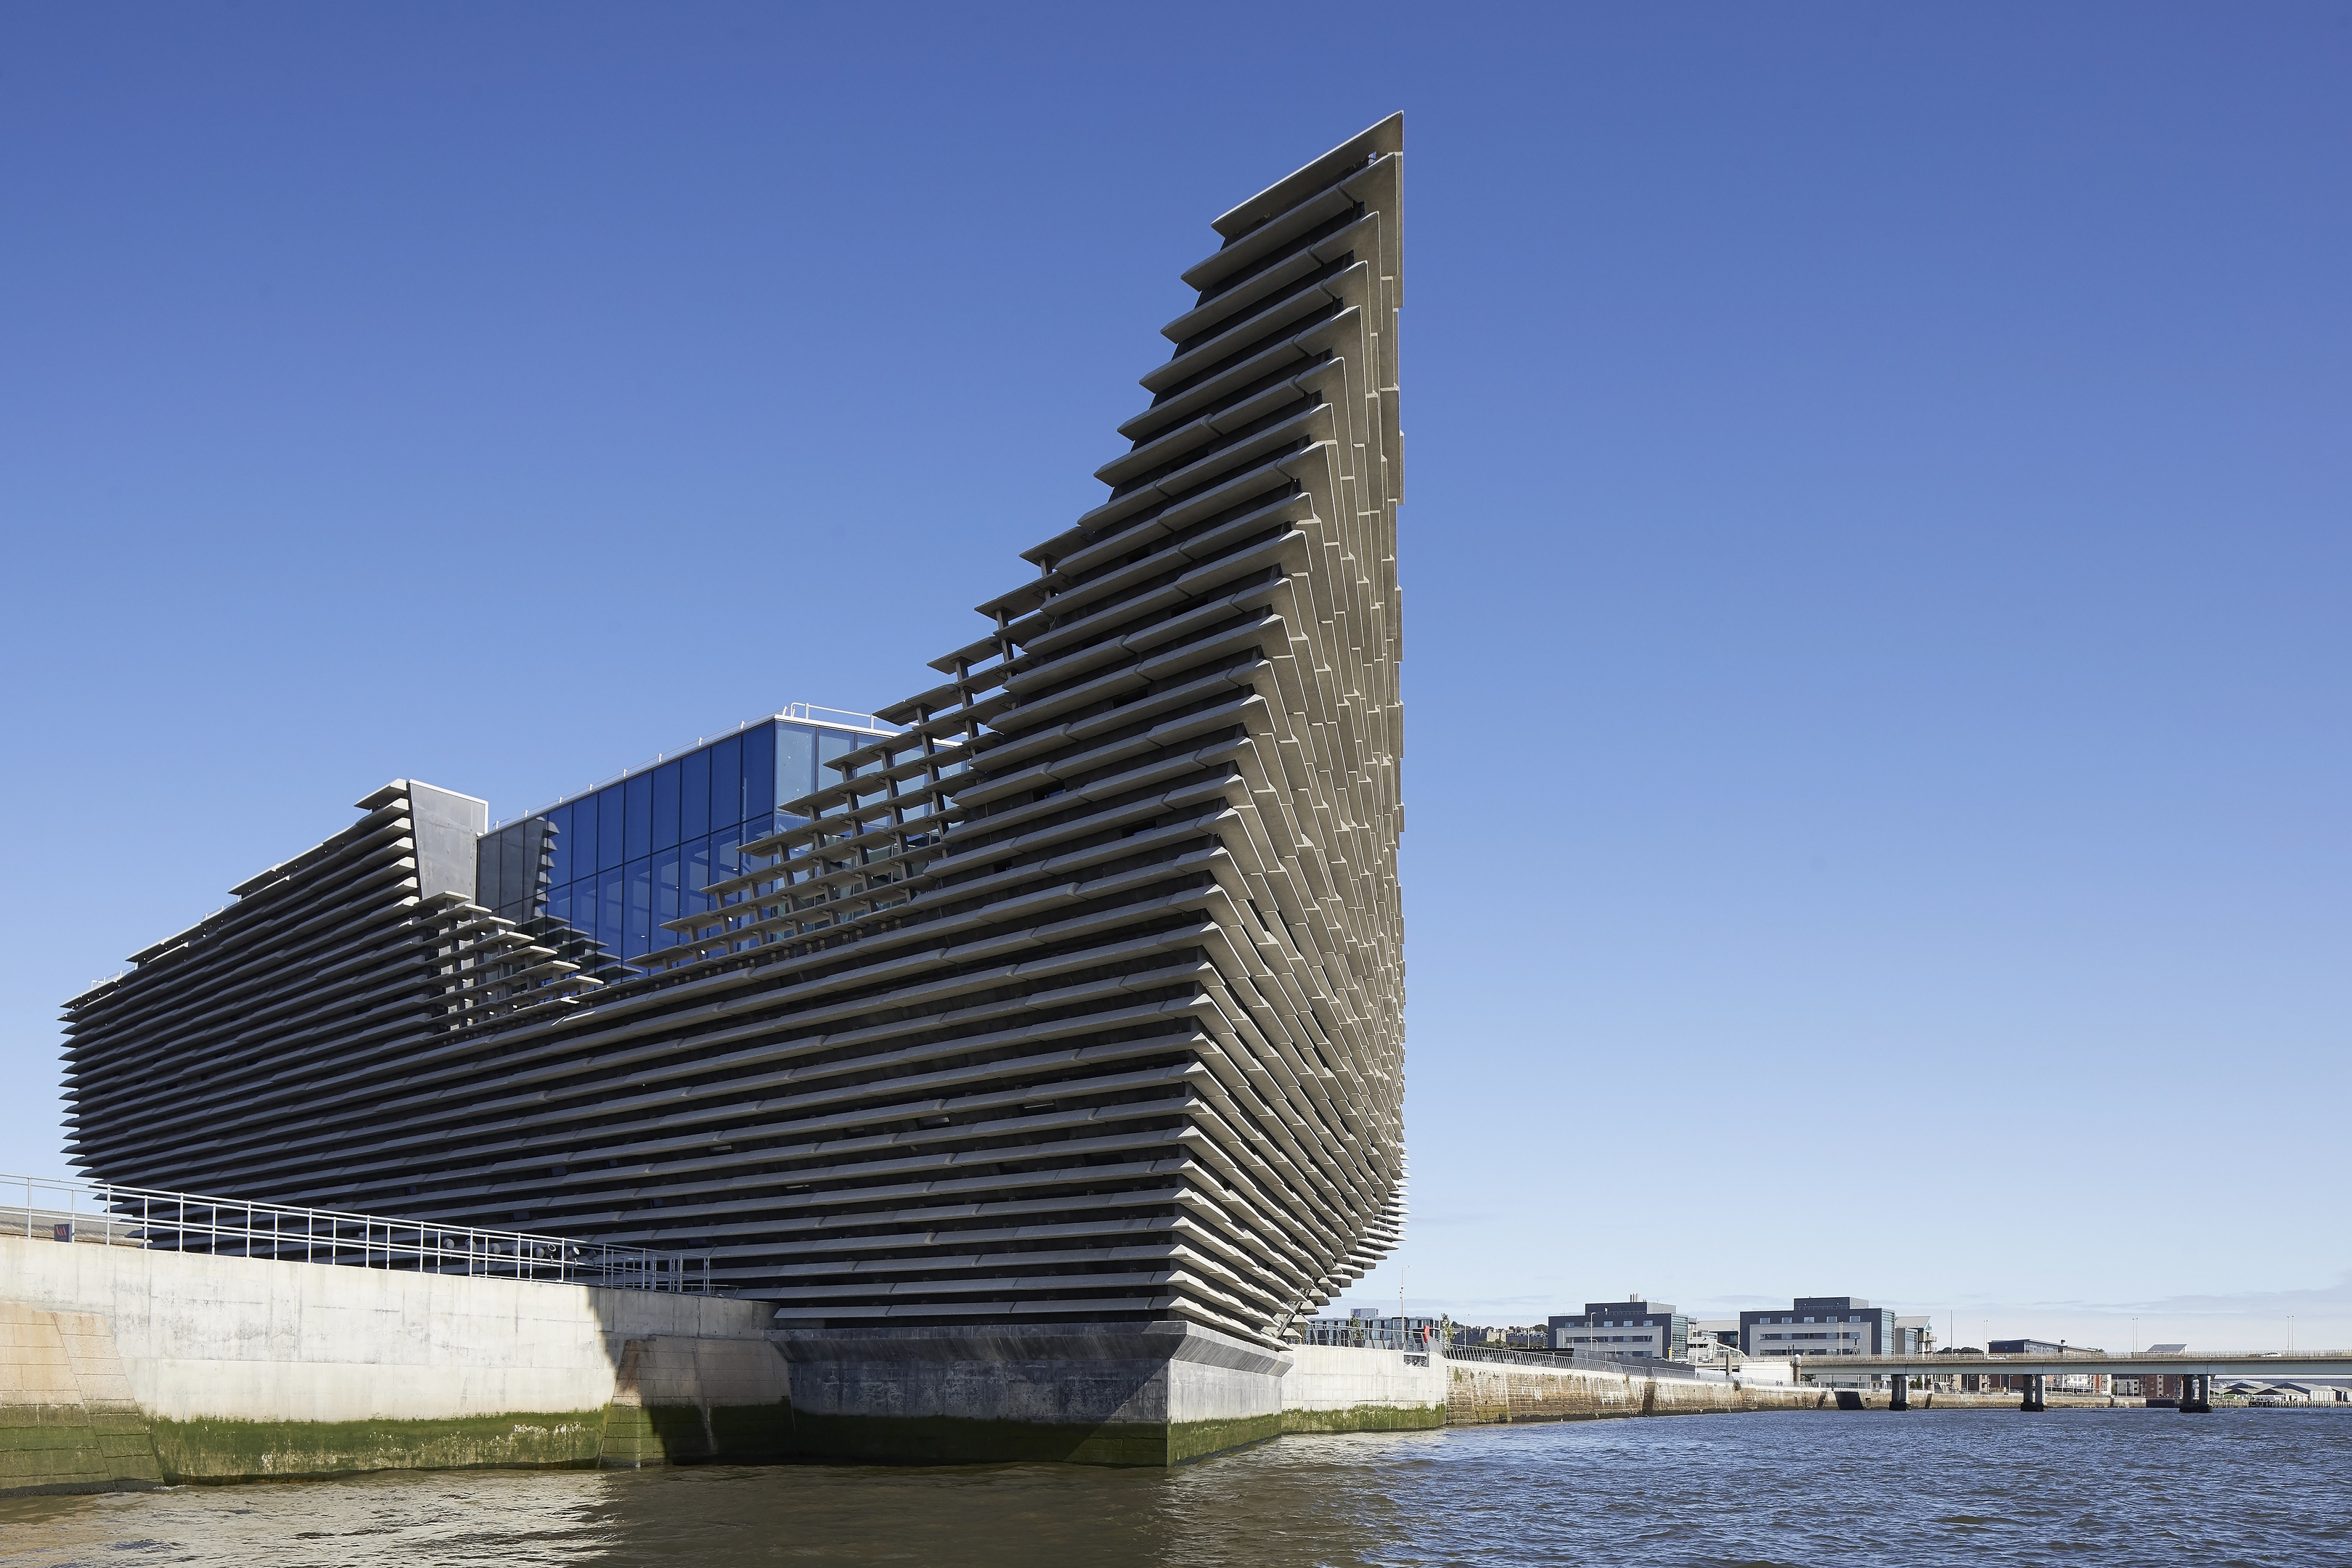 The new building from the water (V&A Dundee / Hufton Crow)